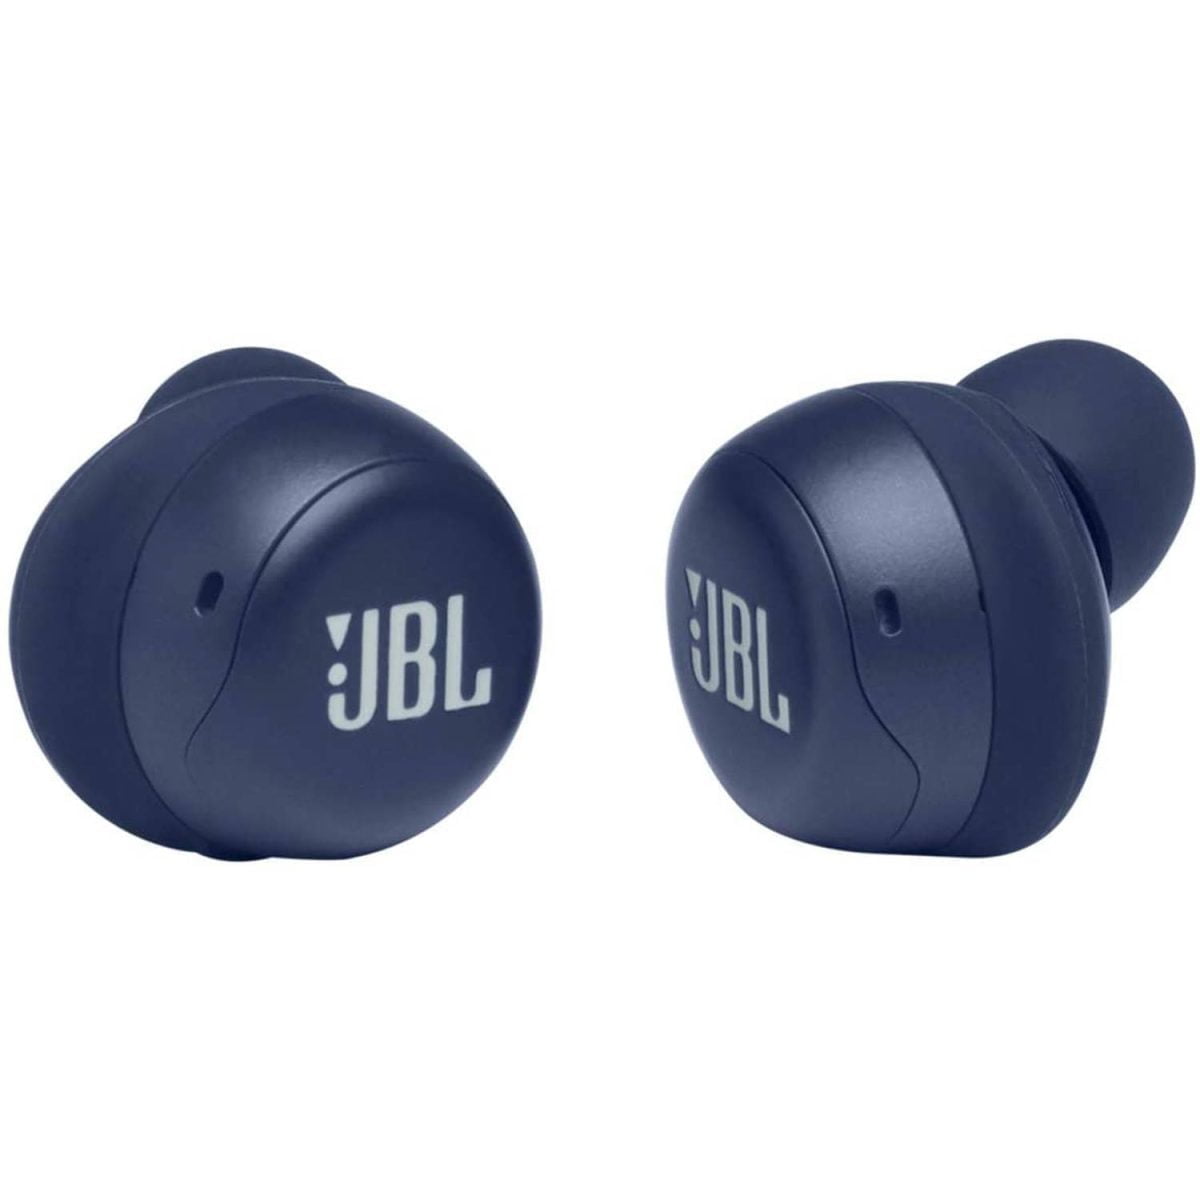 61Aojkeqw5L. Ac Sl1500 Smart Crop C0 5 0 5 1500X1500 70 Jbl &Lt;H1&Gt;Jbl Live Free Nc+Tws True Wireless Noise Cancelling Earbuds-Blue&Lt;/H1&Gt; Https://Www.youtube.com/Watch?V=0Qcsos4Yngw Take On The World, With Style. Jbl Live Free Nc+ Tws Earbuds Deliver Jbl Signature Sound With Supreme Comfort. Stay In The Groove All Day Long Without Noise Or Any Distractions Thanks To Active Noise Cancelling, While Talkthru And Ambient Aware Keep You In Touch With Your Friends And Surroundings. Up To 21 Hours Of Battery Life. Jbl Live Jbl Live Free Nc+Tws True Wireless Noise Cancelling Earbuds-Blue